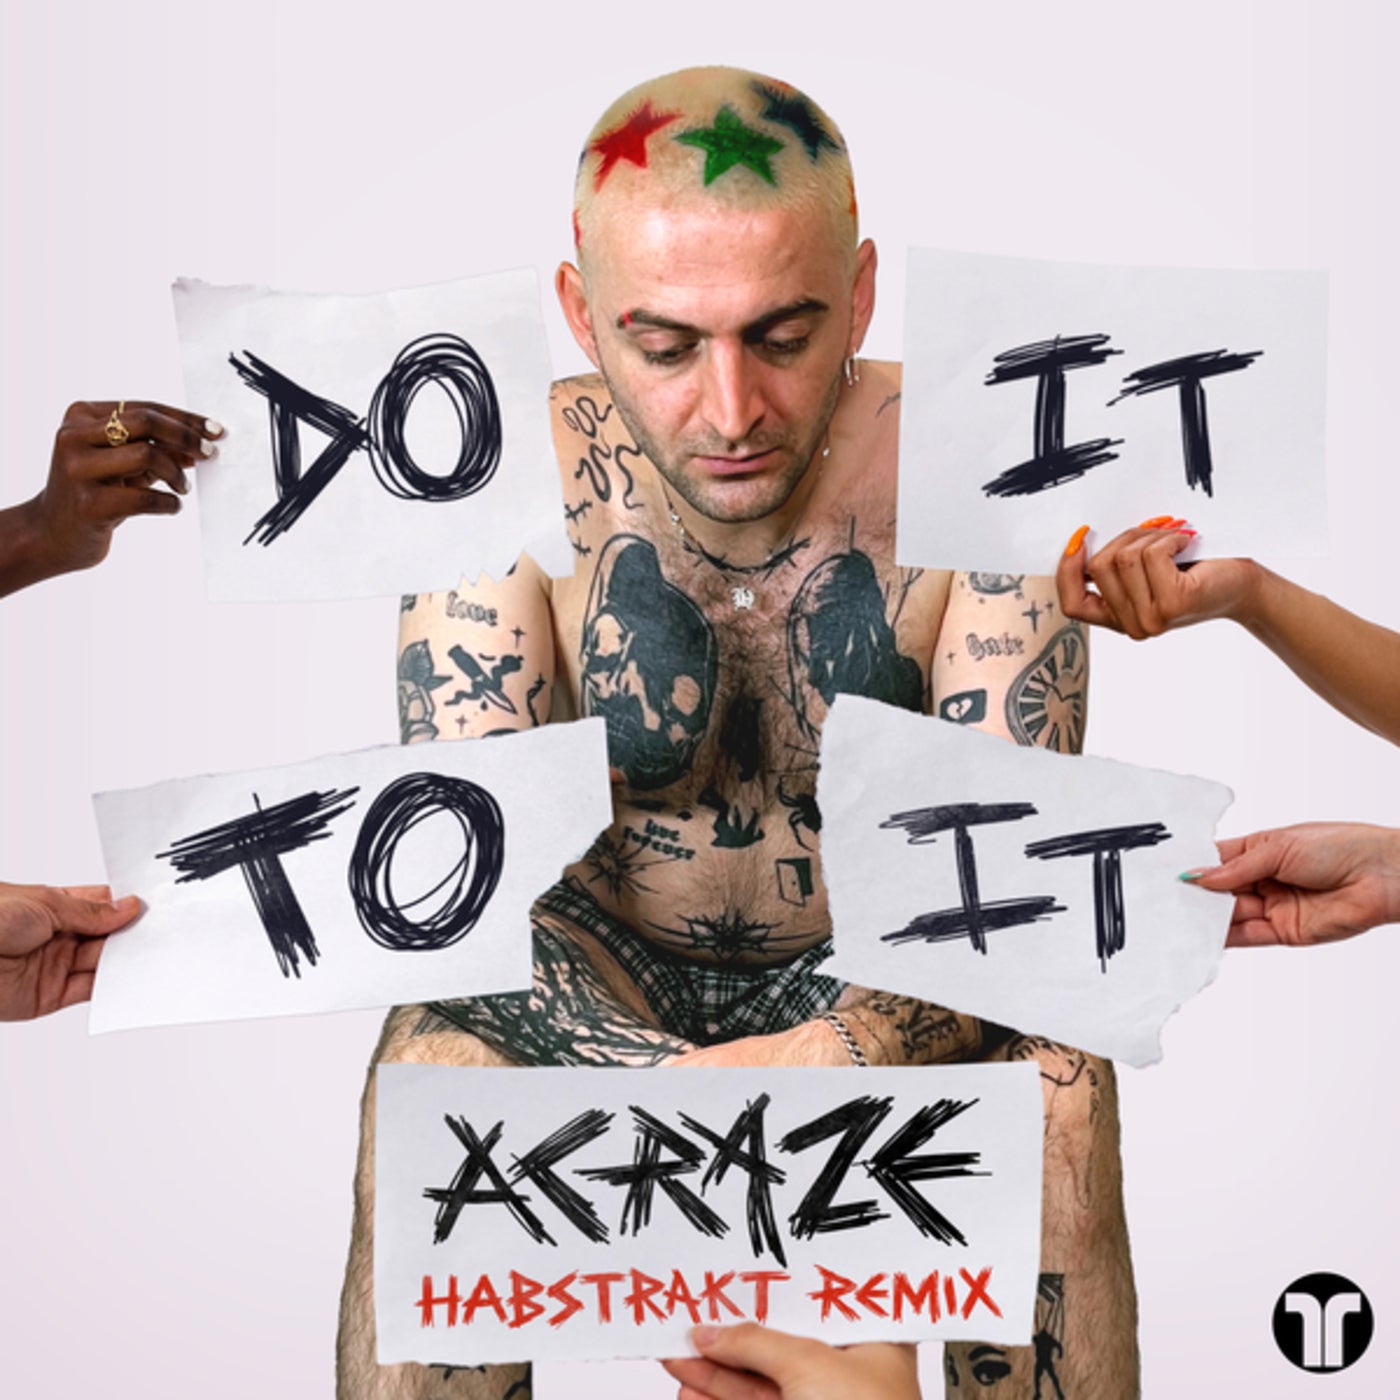 Do It To It (Habstrakt Extended Remix)